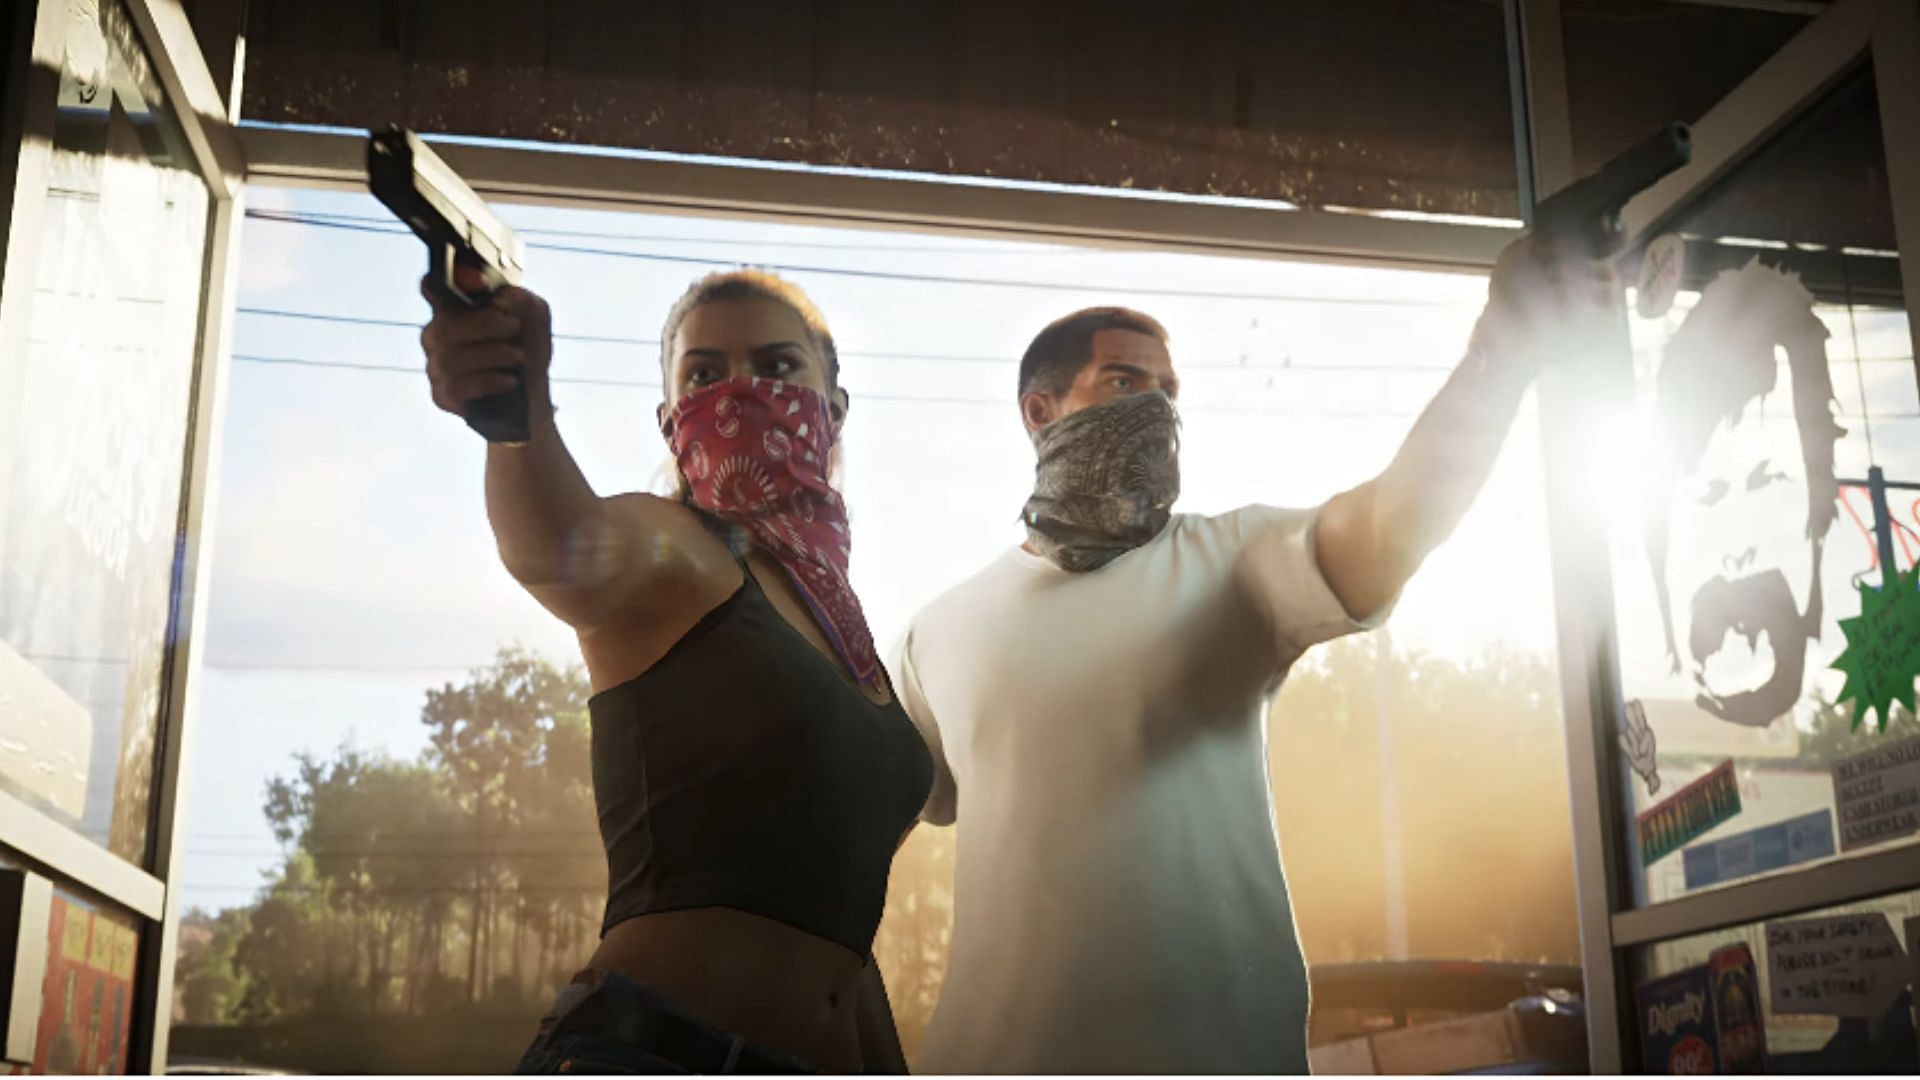 Lucia and her partner, allegedly Jason, entering a store in the trailer (Image via Rockstar Games)